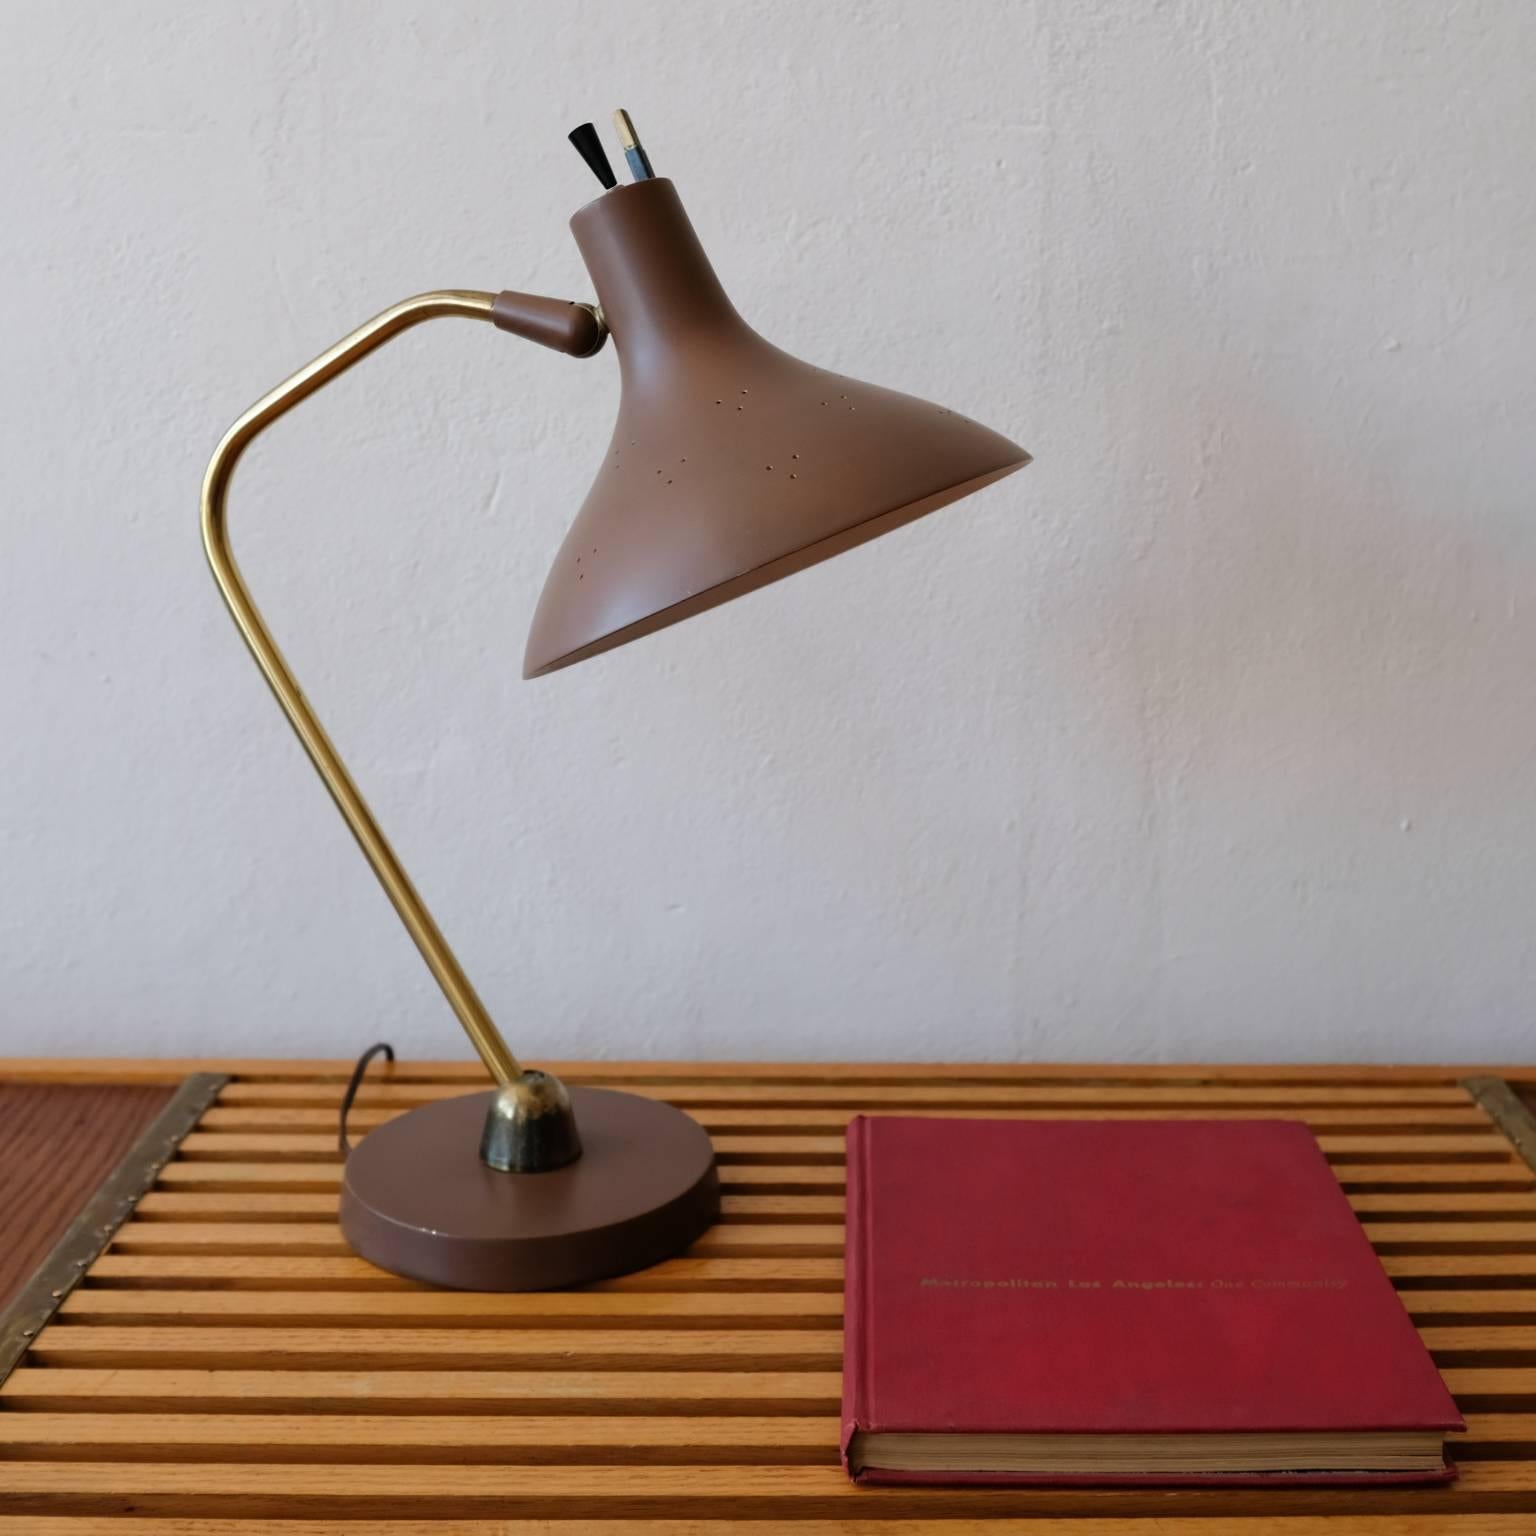 Lightolier desk lamp with perforated metal pivoting shade. Includes the original and rarely-seen metal bulb diffuser. Brass arm and handle. Original finish in great condition.